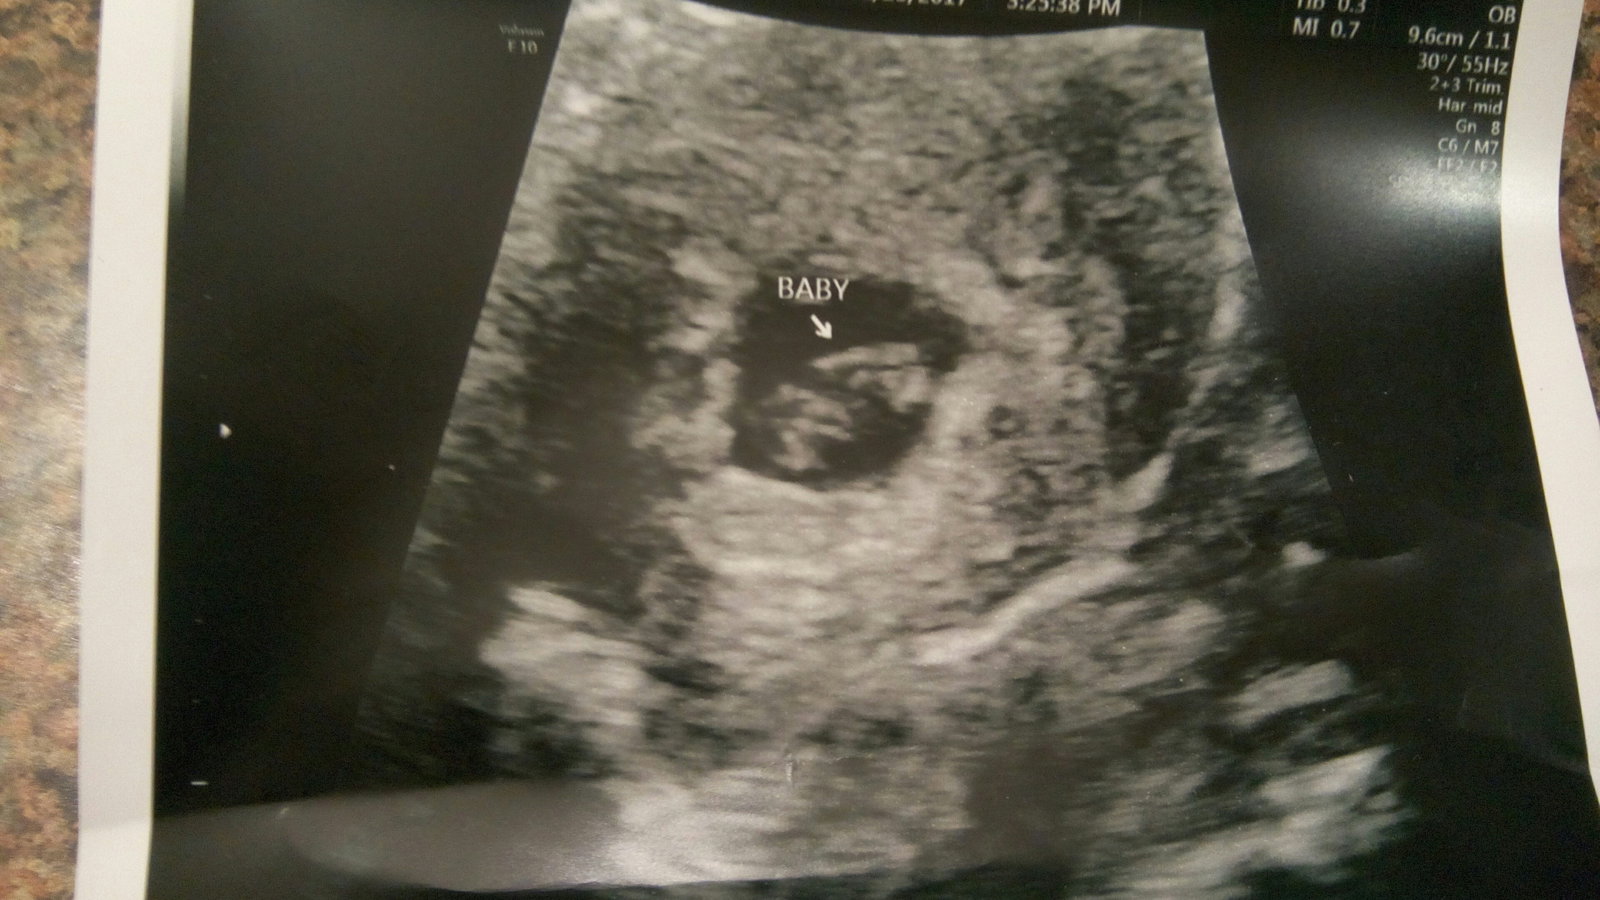 Watch the Photo by Babyji~Queen with the username @BabyjiQueen, posted on January 26, 2017 and the text says 'There was so much crying in that office yesterday. Every thing is perfect so far and I am completely over the moon about it. I can’t wait to meet this little angel.

 #Me  #Mybebe  #155bpm'